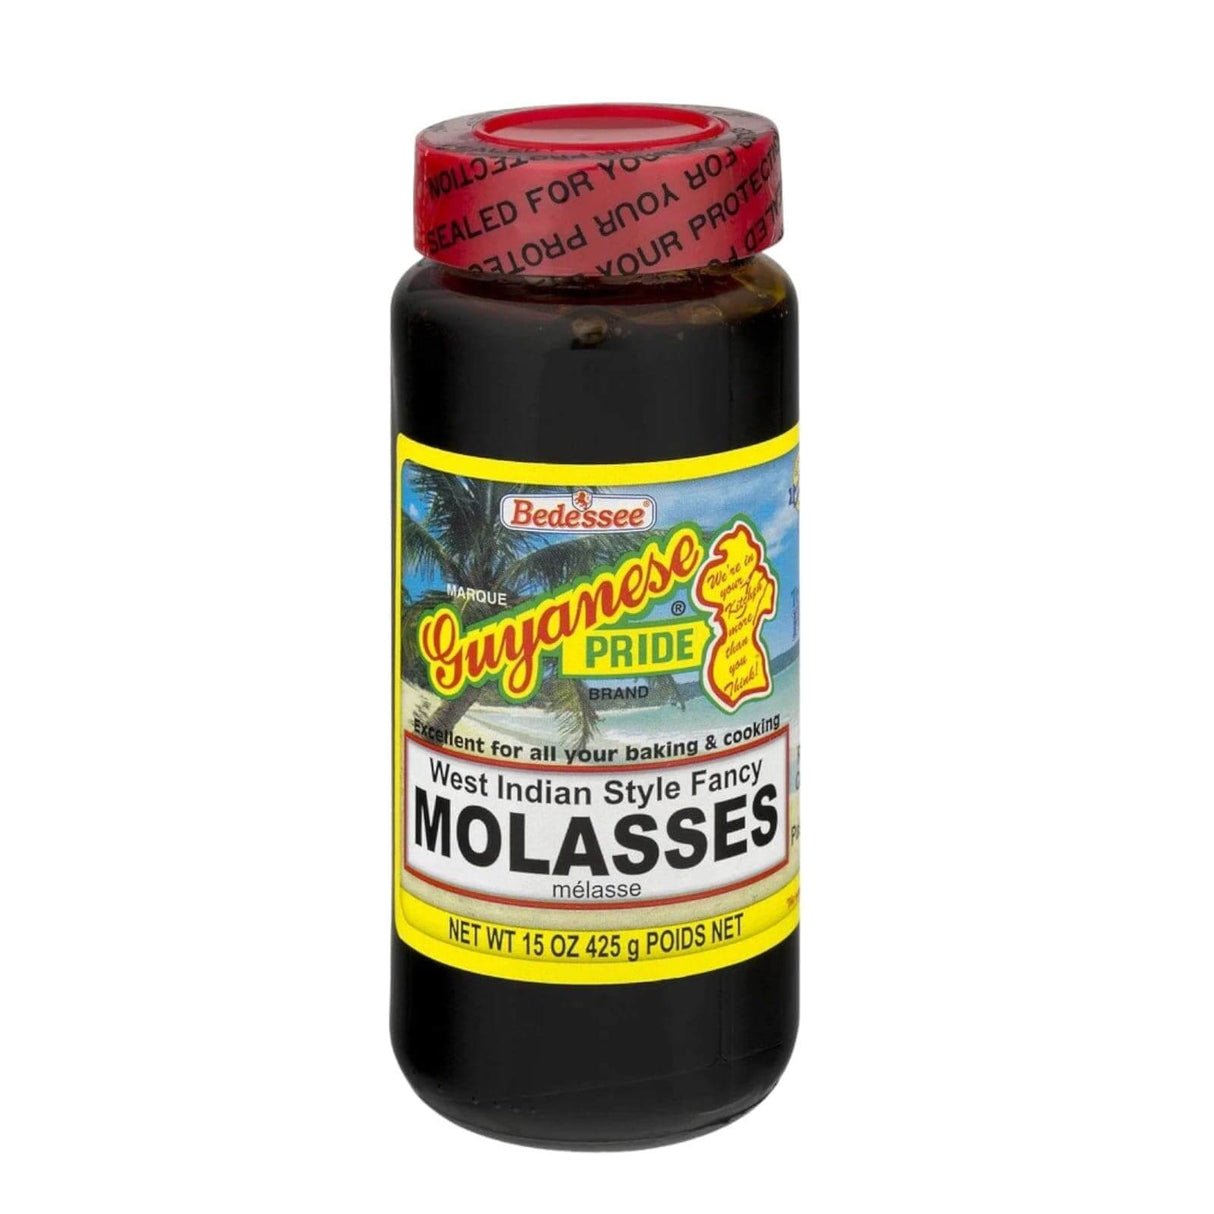 Guyanese Pride Brand West Indian Style Molasses